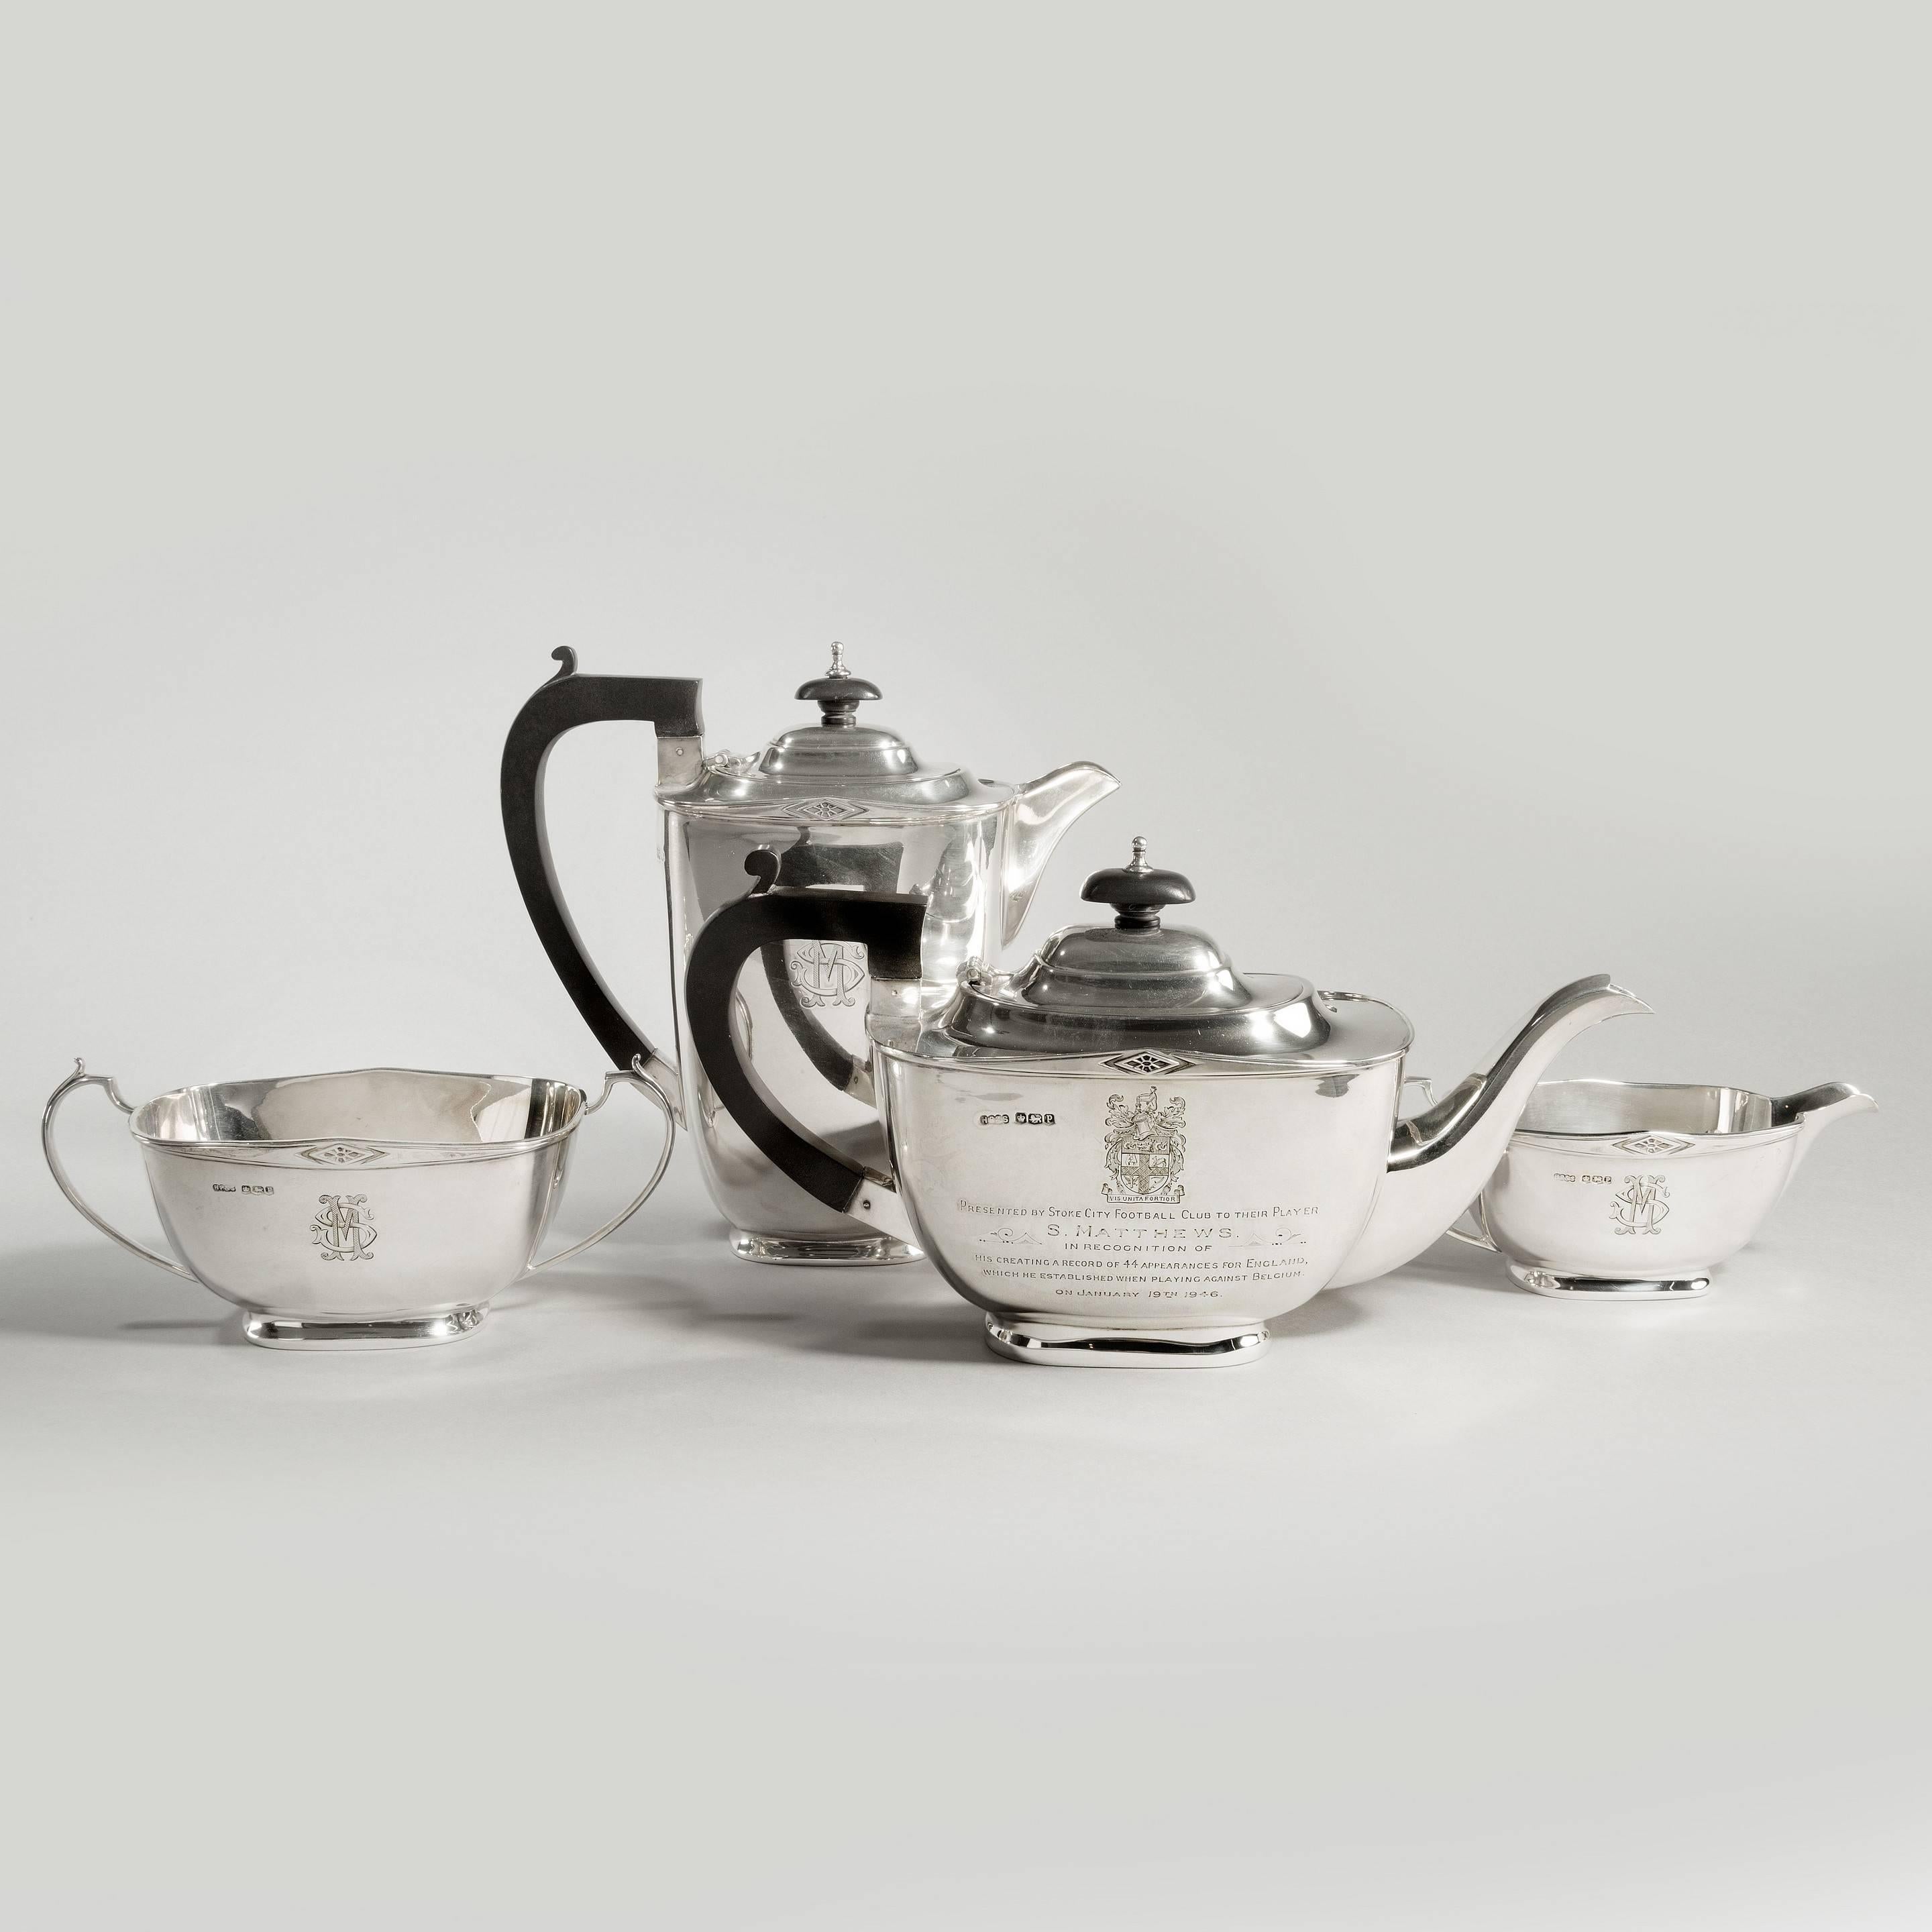 A four-piece silver tea set of football importance,

presented to Stanley Matthews, H Pidduck & Sons Sheffield, 1932, of ovoid shape, the rims inset with geometric forms, each piece inscribed with an S M monogram, the teapot inscribed with the